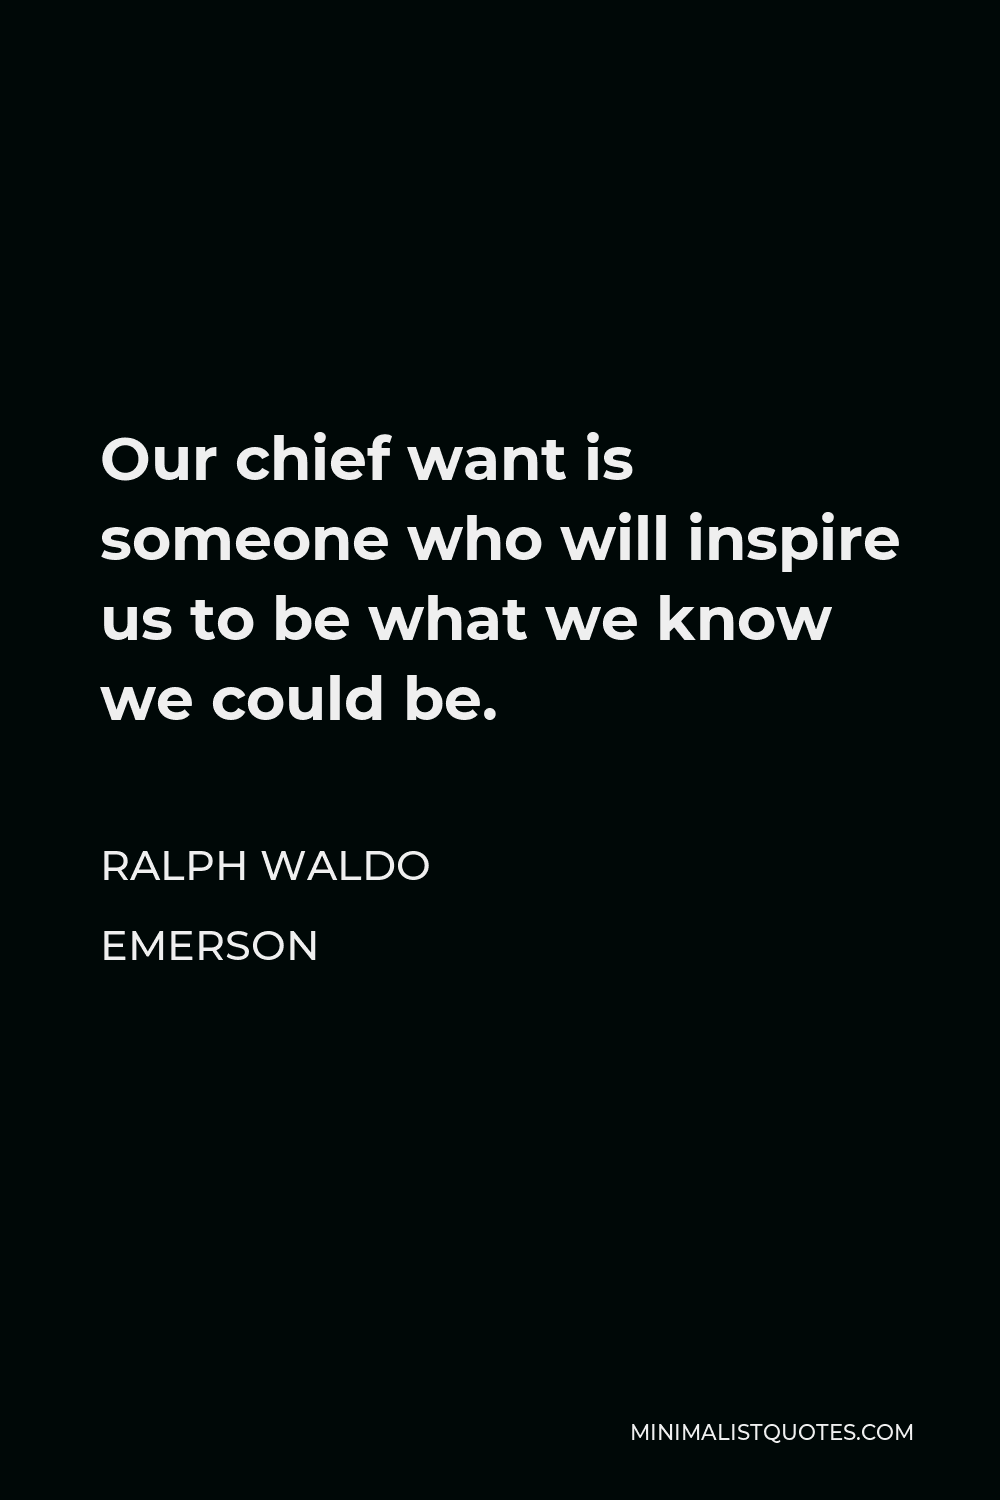 Ralph Waldo Emerson Quote - Our chief want is someone who will inspire us to be what we know we could be.